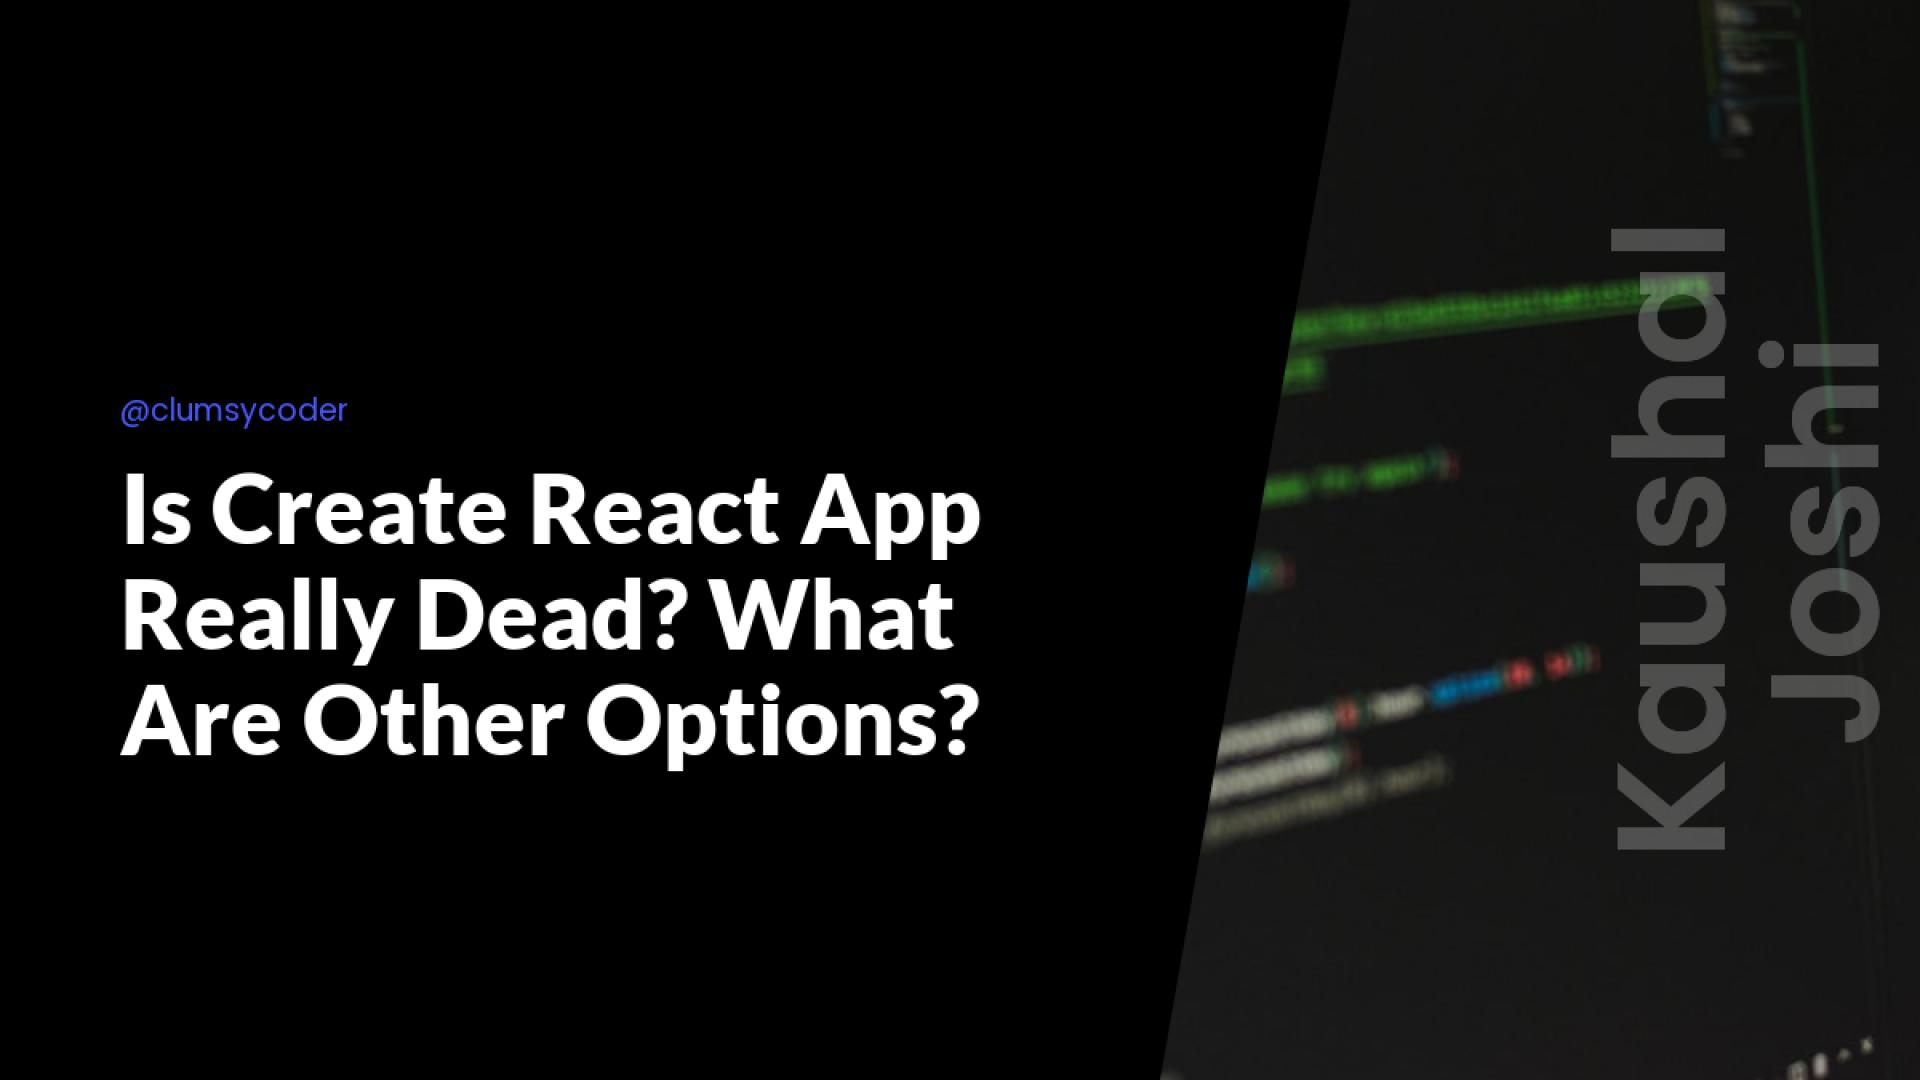 Is Create React App Really Dead? What Are Other Options?